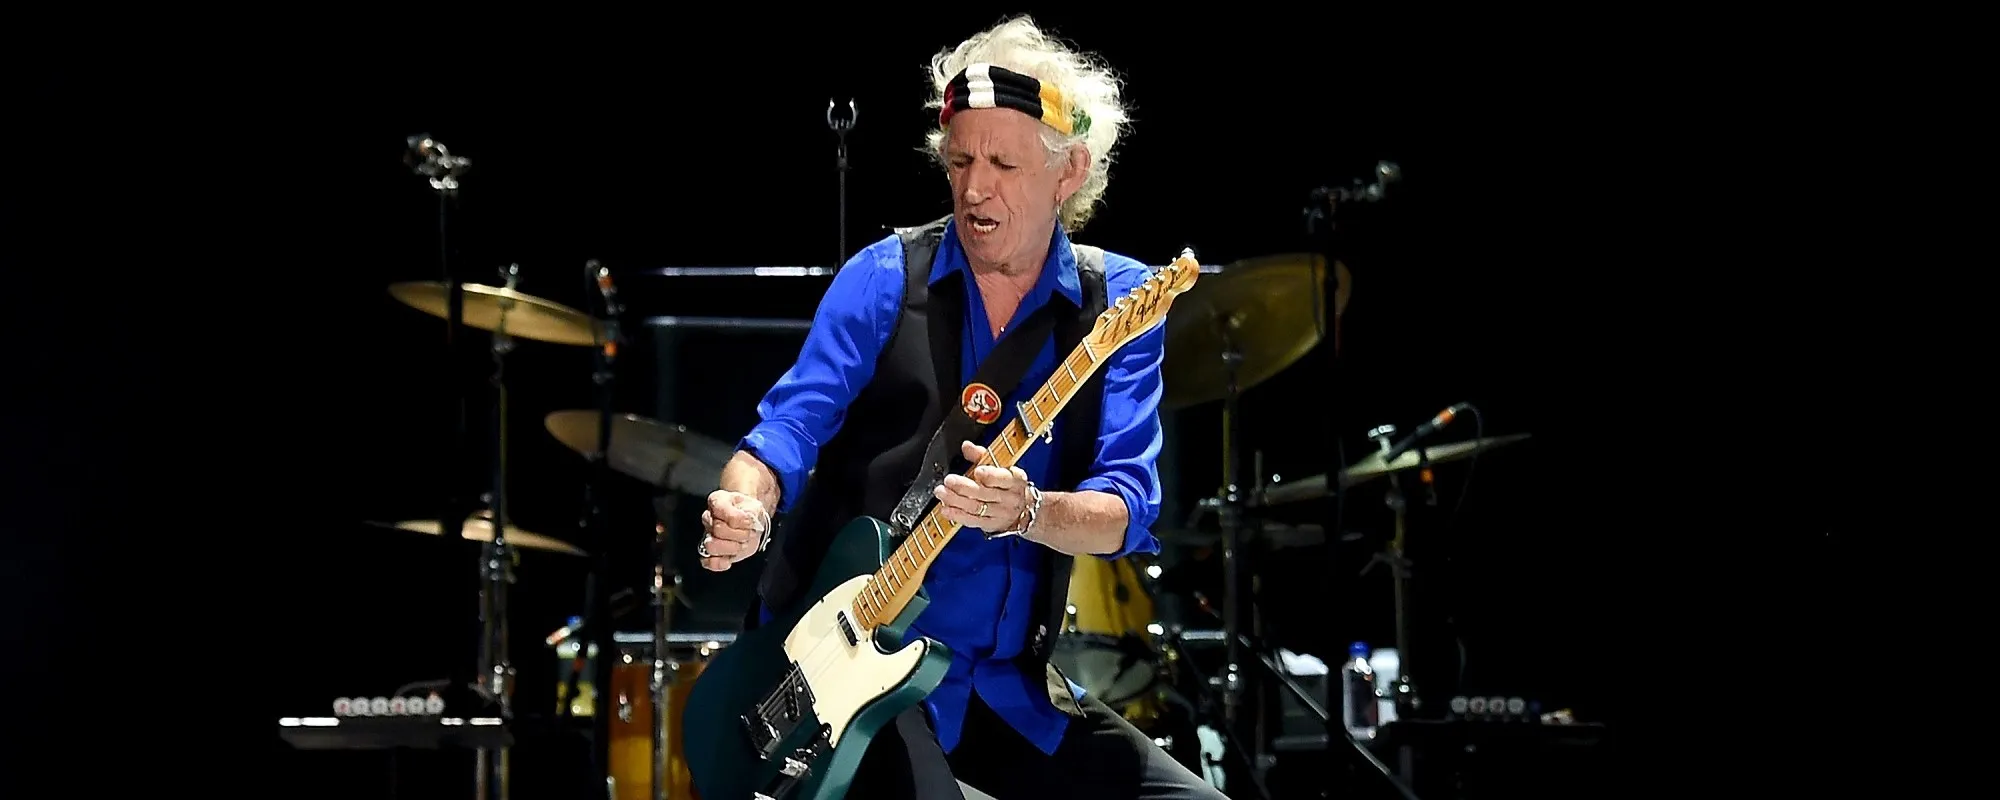 See How The Rolling Stones Are Paying Tribute to Keith Richards on His 80th Birthday